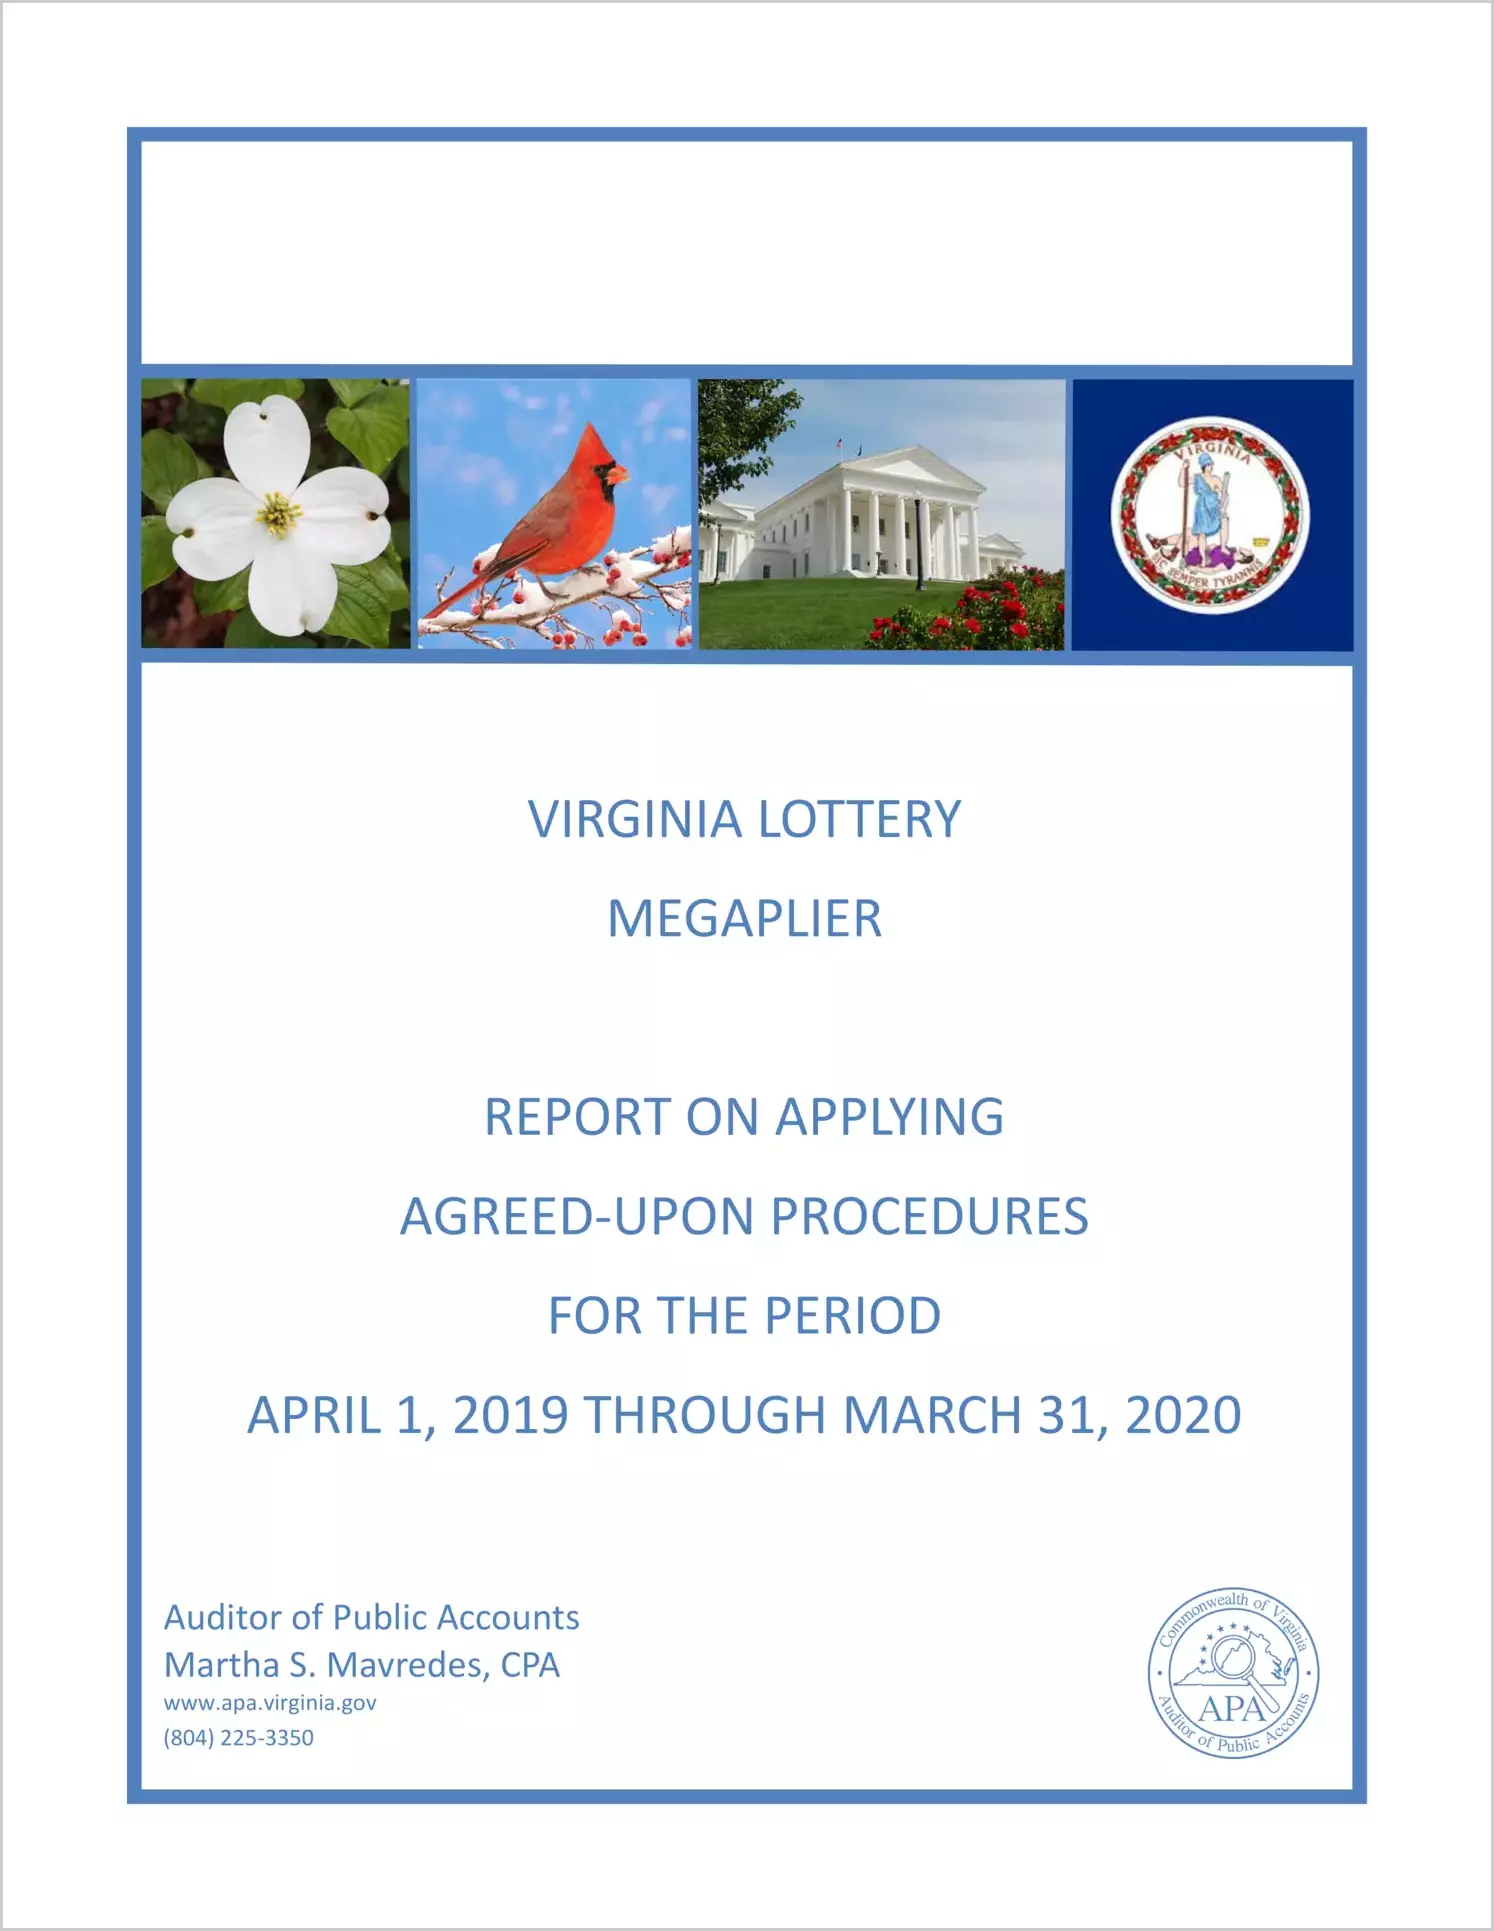 Virginia Lottery Megaplier Report on Applying Agreed-Upon Procedures for the period April 1, 2019 through March 31, 2020